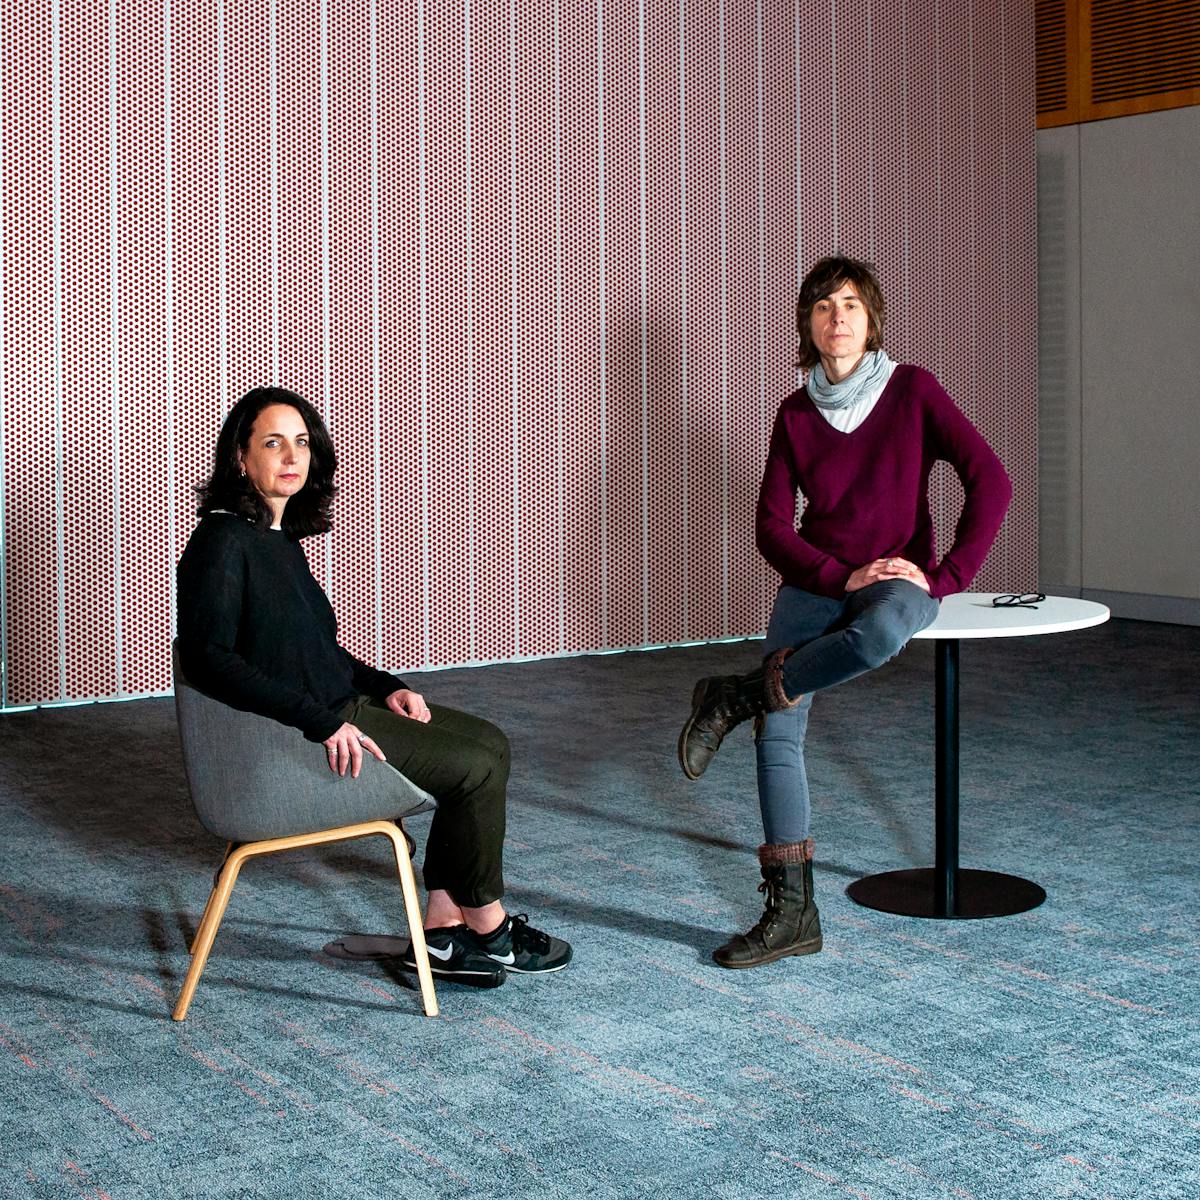 Photographic full length portrait of two women in a meeting room with blue patterned carpet and a red and white spot patterned wall. One woman is seated, sideways to camera looking over her shoulder at the lens. The other woman in sitting on a circular table looking to camera, one leg crossed over the other. Her glasses are folded on the table top beside her.